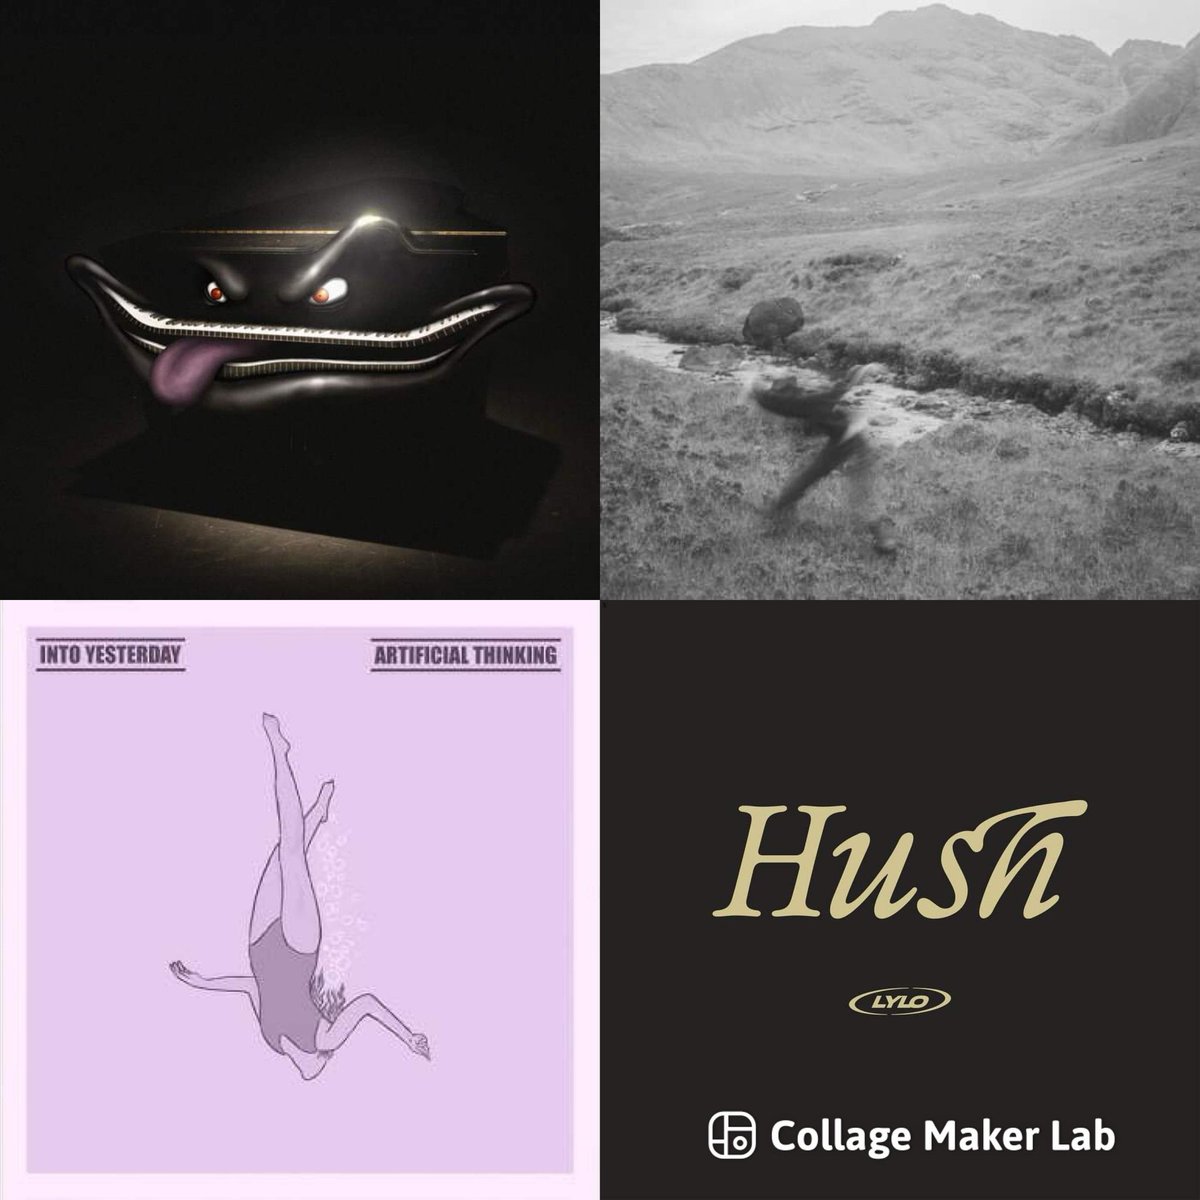 New tracks added to our Best New Scottish Music Playlist featuring: Clarissa Connelly - An Embroidery @WarpRecords Alvidrez - Yellow @M_o_D_RCRDS @_IntoYesterday - Artificial Thinking @lyloband - Hush [ft. Esme Dee] @elranchorecords open.spotify.com/playlist/5vorH…